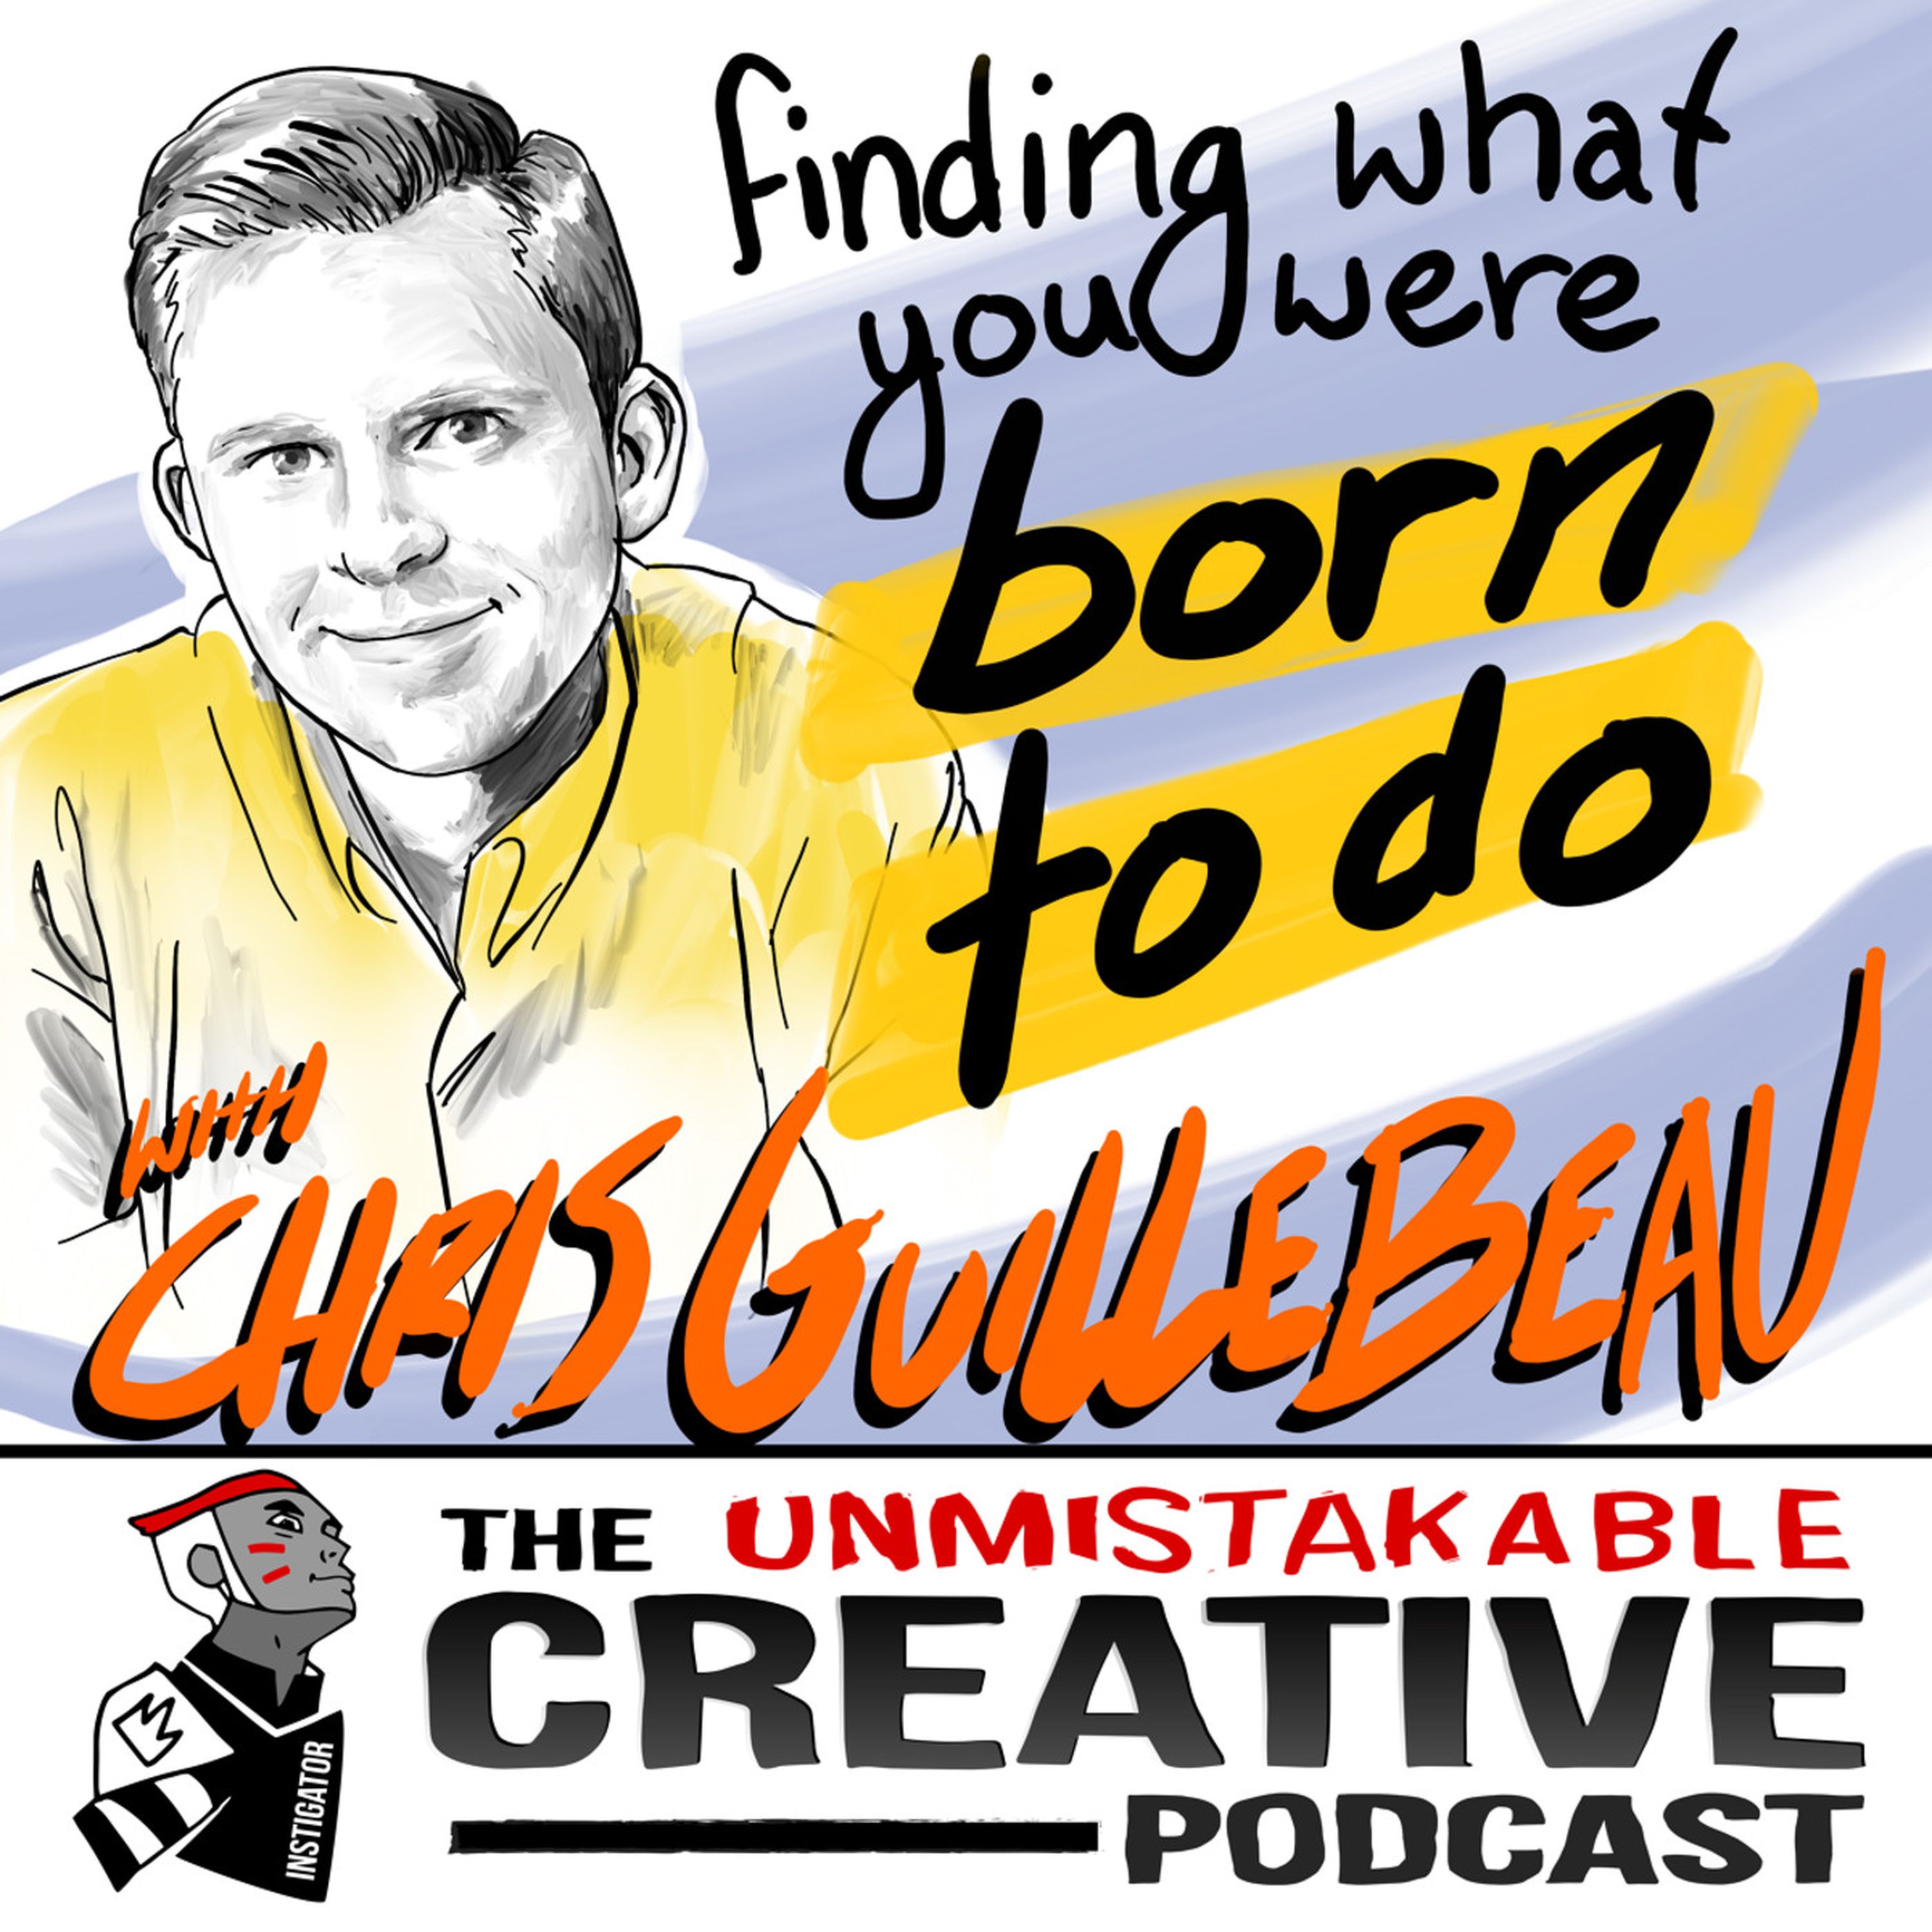 Best of: Chris Guillebeau: Finding What You Were Born to Do